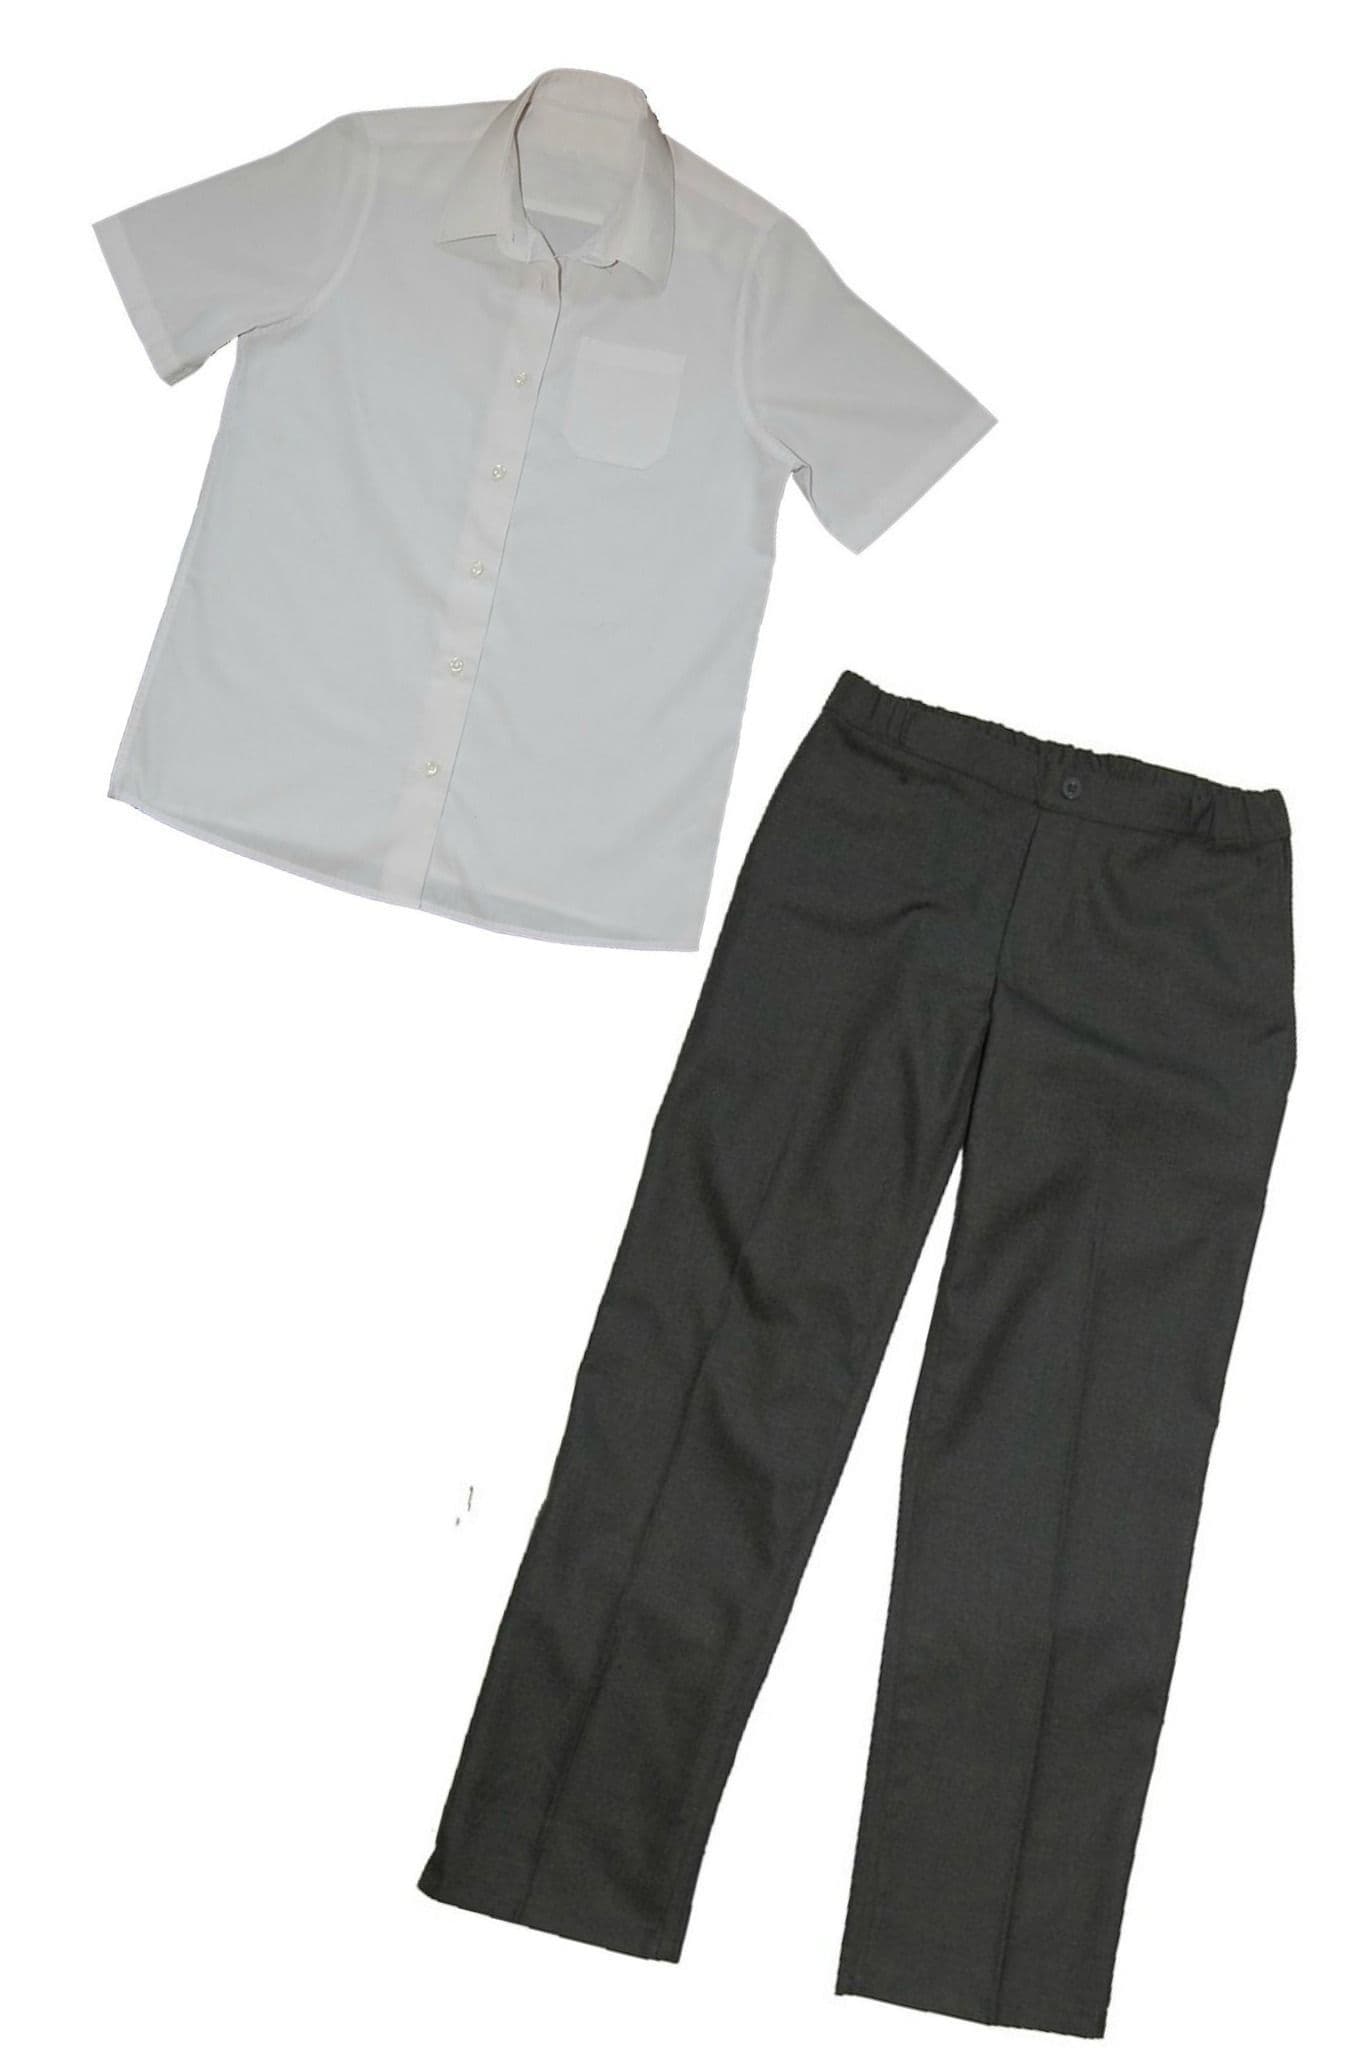 Autism Friendly Mid Grey School Trousers - Spectra Sensory Clothing from